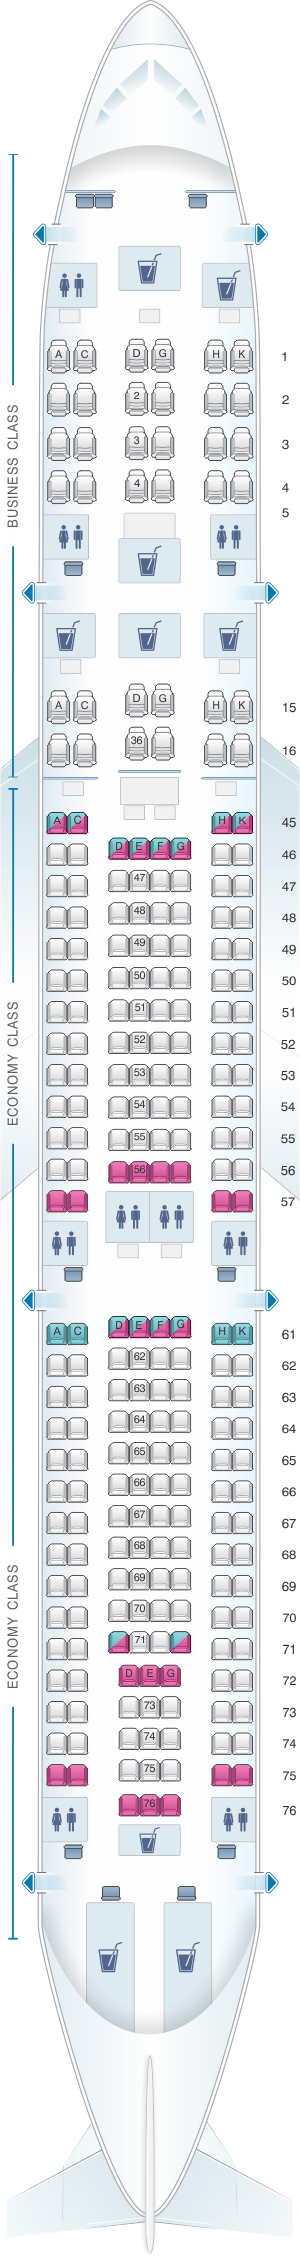 Seat Map South African Airways Airbus A340 300 V2 | SeatMaestro